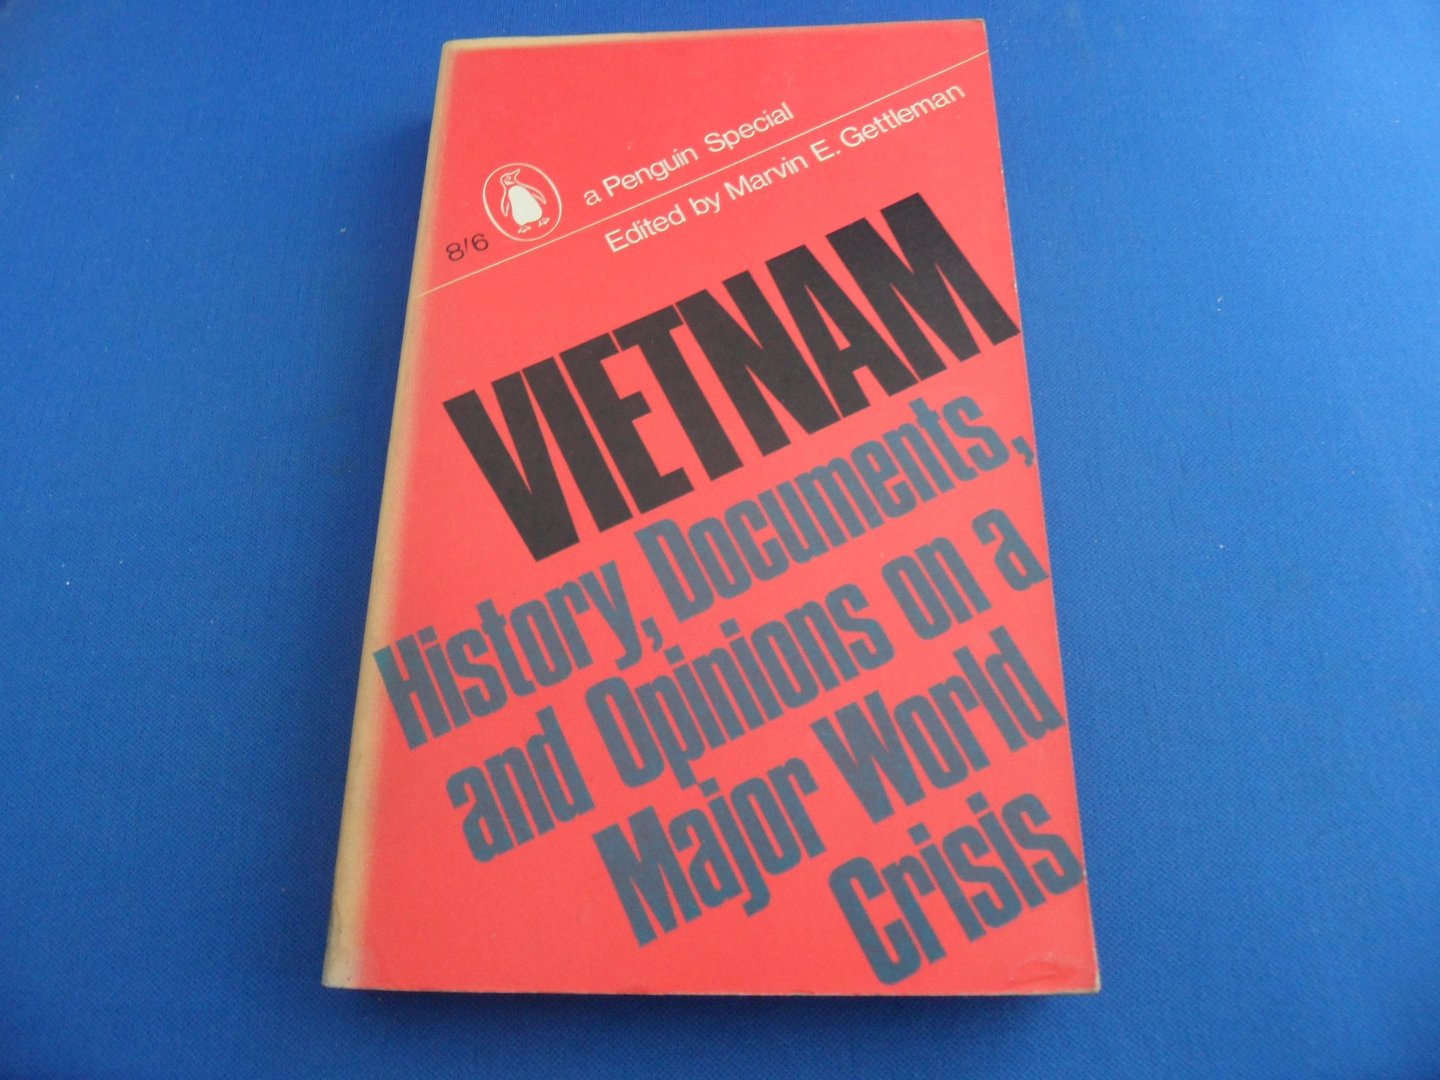 Gettleman, Marvin E. - Vietnam. History, Documents, and Opinions on a Major World Crisis